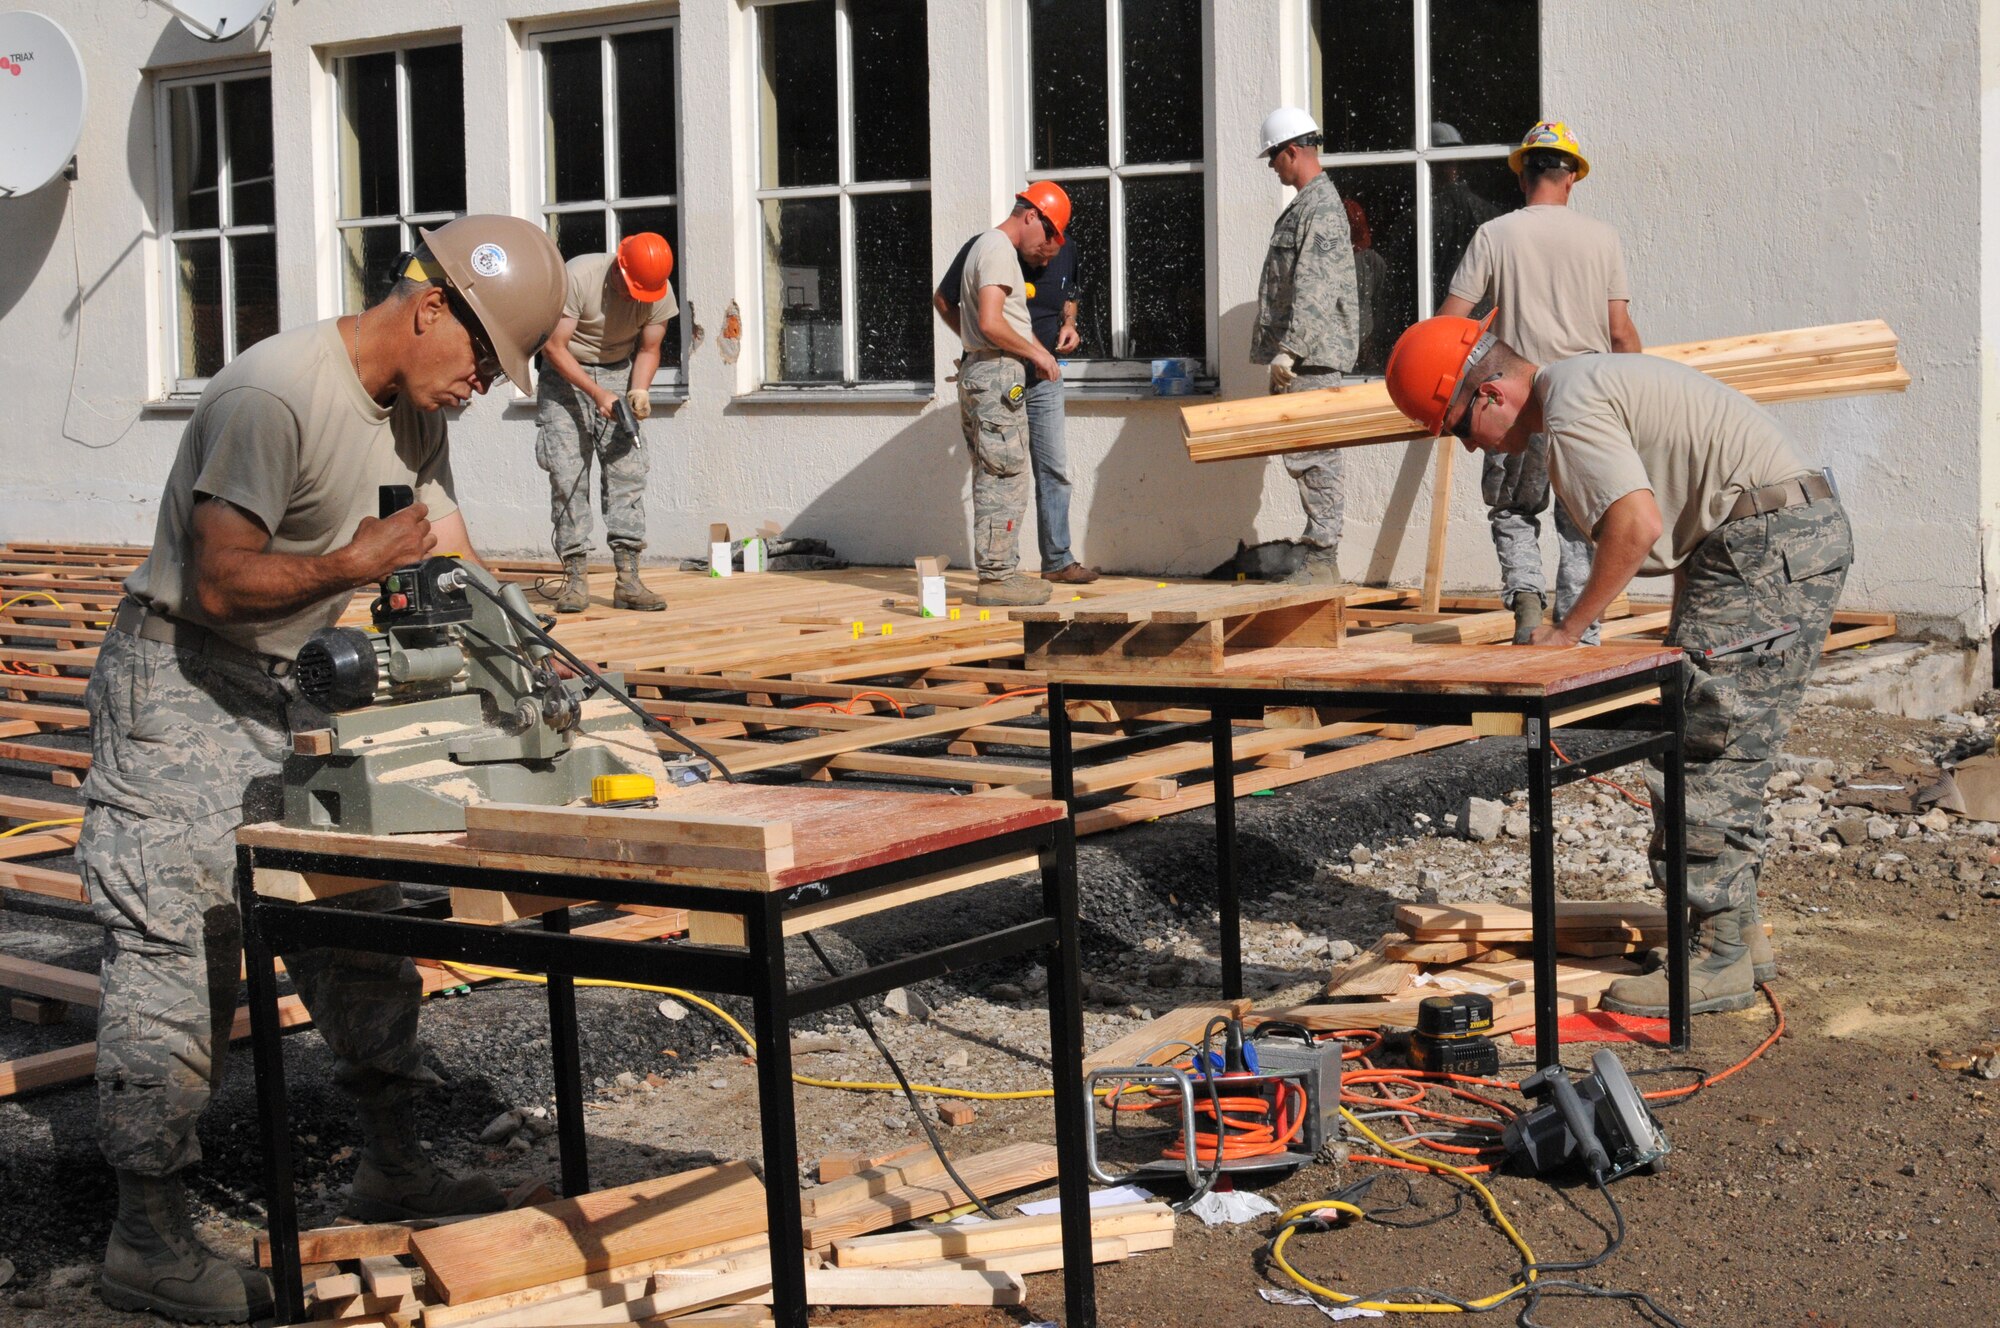 Wyoming Air National Guard Airmen assigned to the 153rd Civil Engineer Squadron complete decking at the recreation center site at the NATO School Aug. 24, 2012, in Oberammergau, Germany. Airmen from the 153rd CES are putting their skills to work as they conduct their annual training. (U.S. Air Force photo by Tech. Sgt. Natalie Stanley)